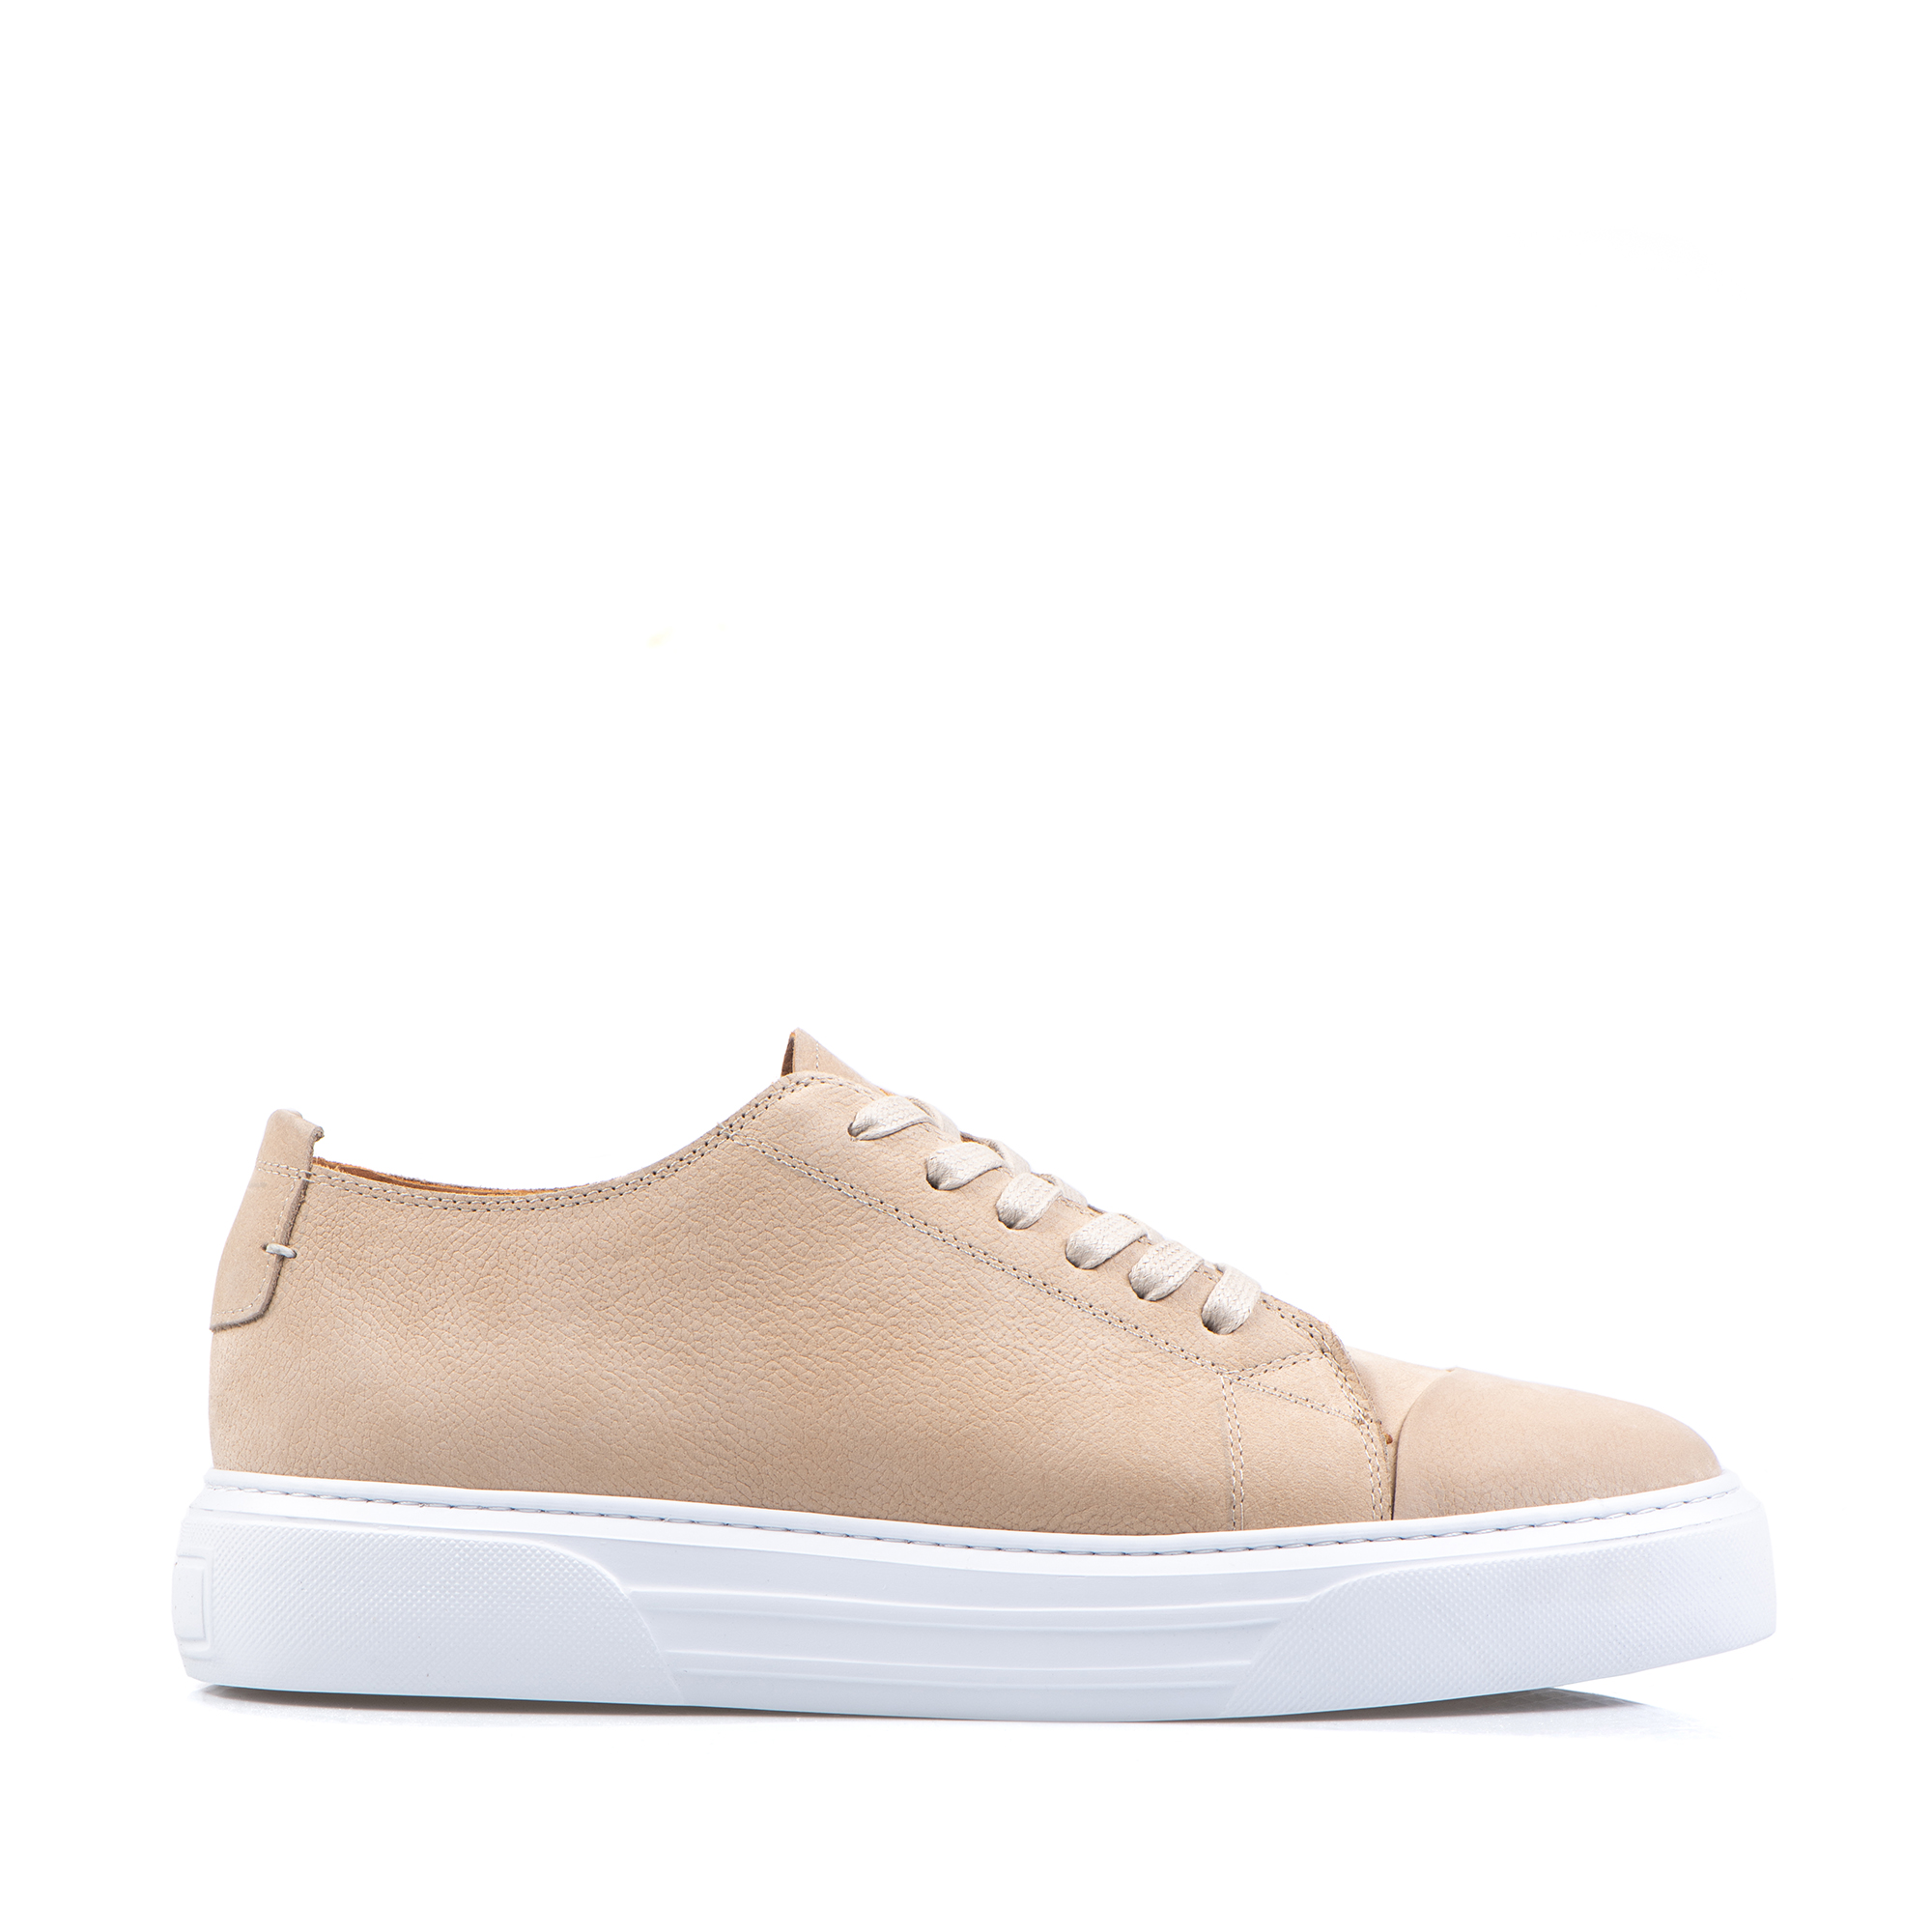 LEATHER SNEAKERS LXII